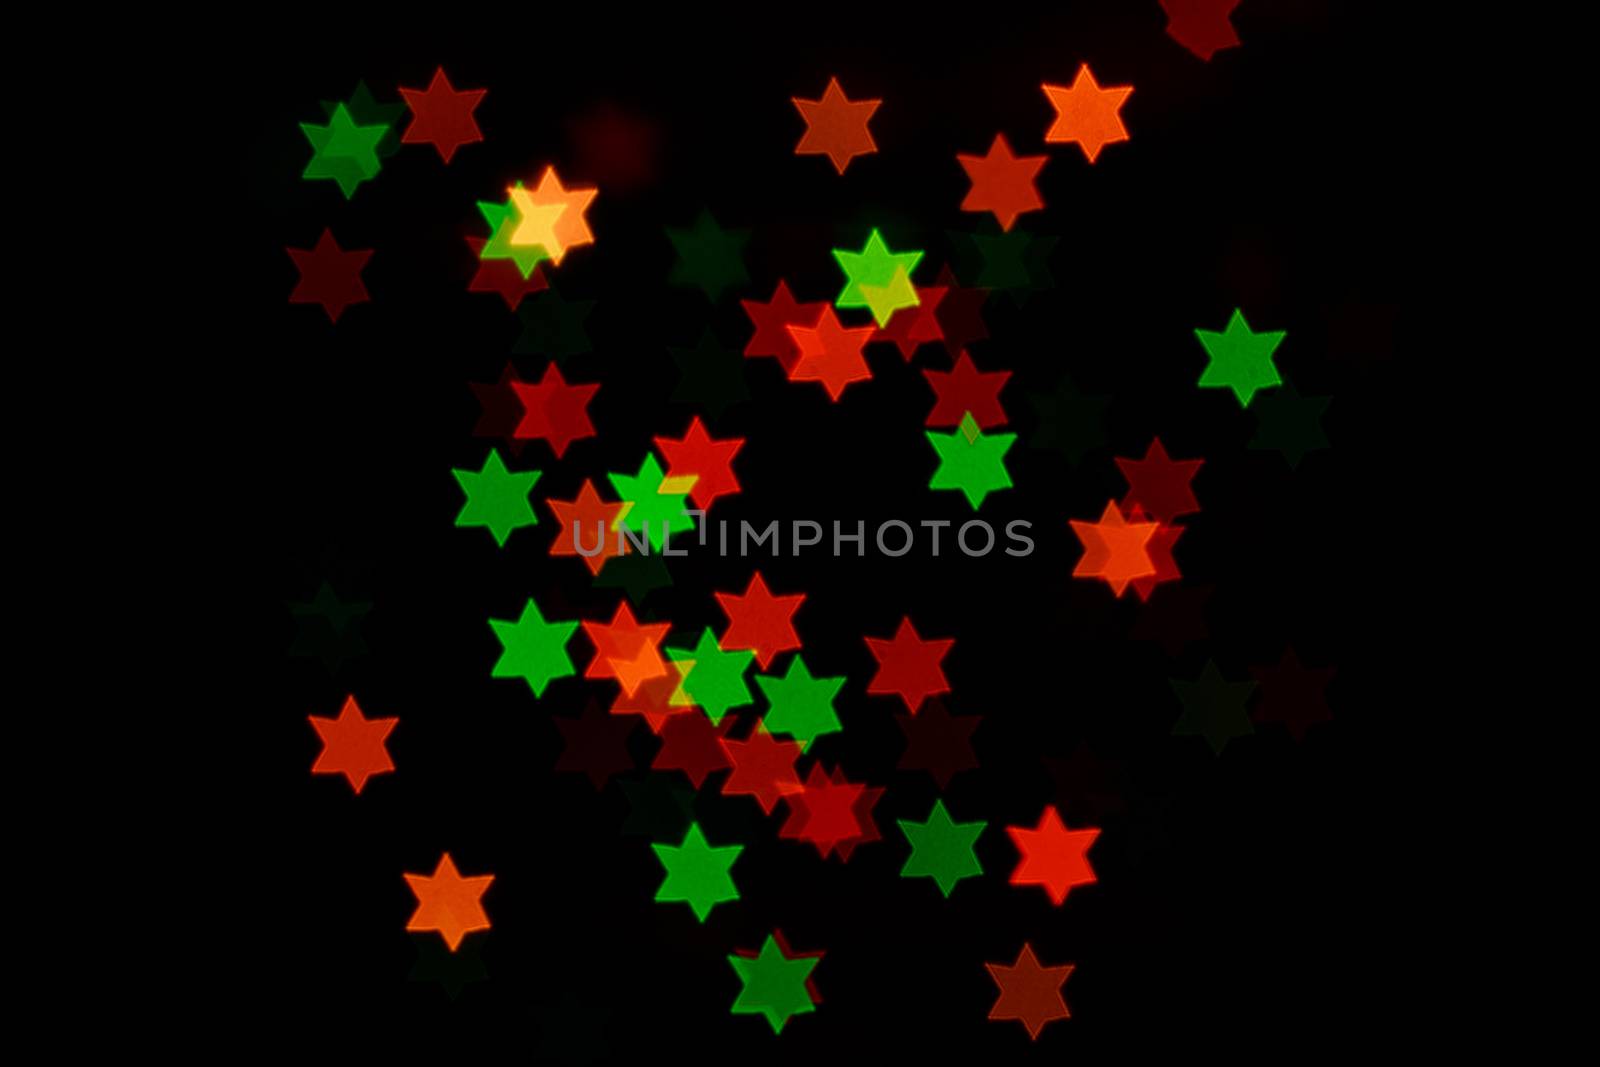 Abstract colorful background for the Jewish holidays shot closeup